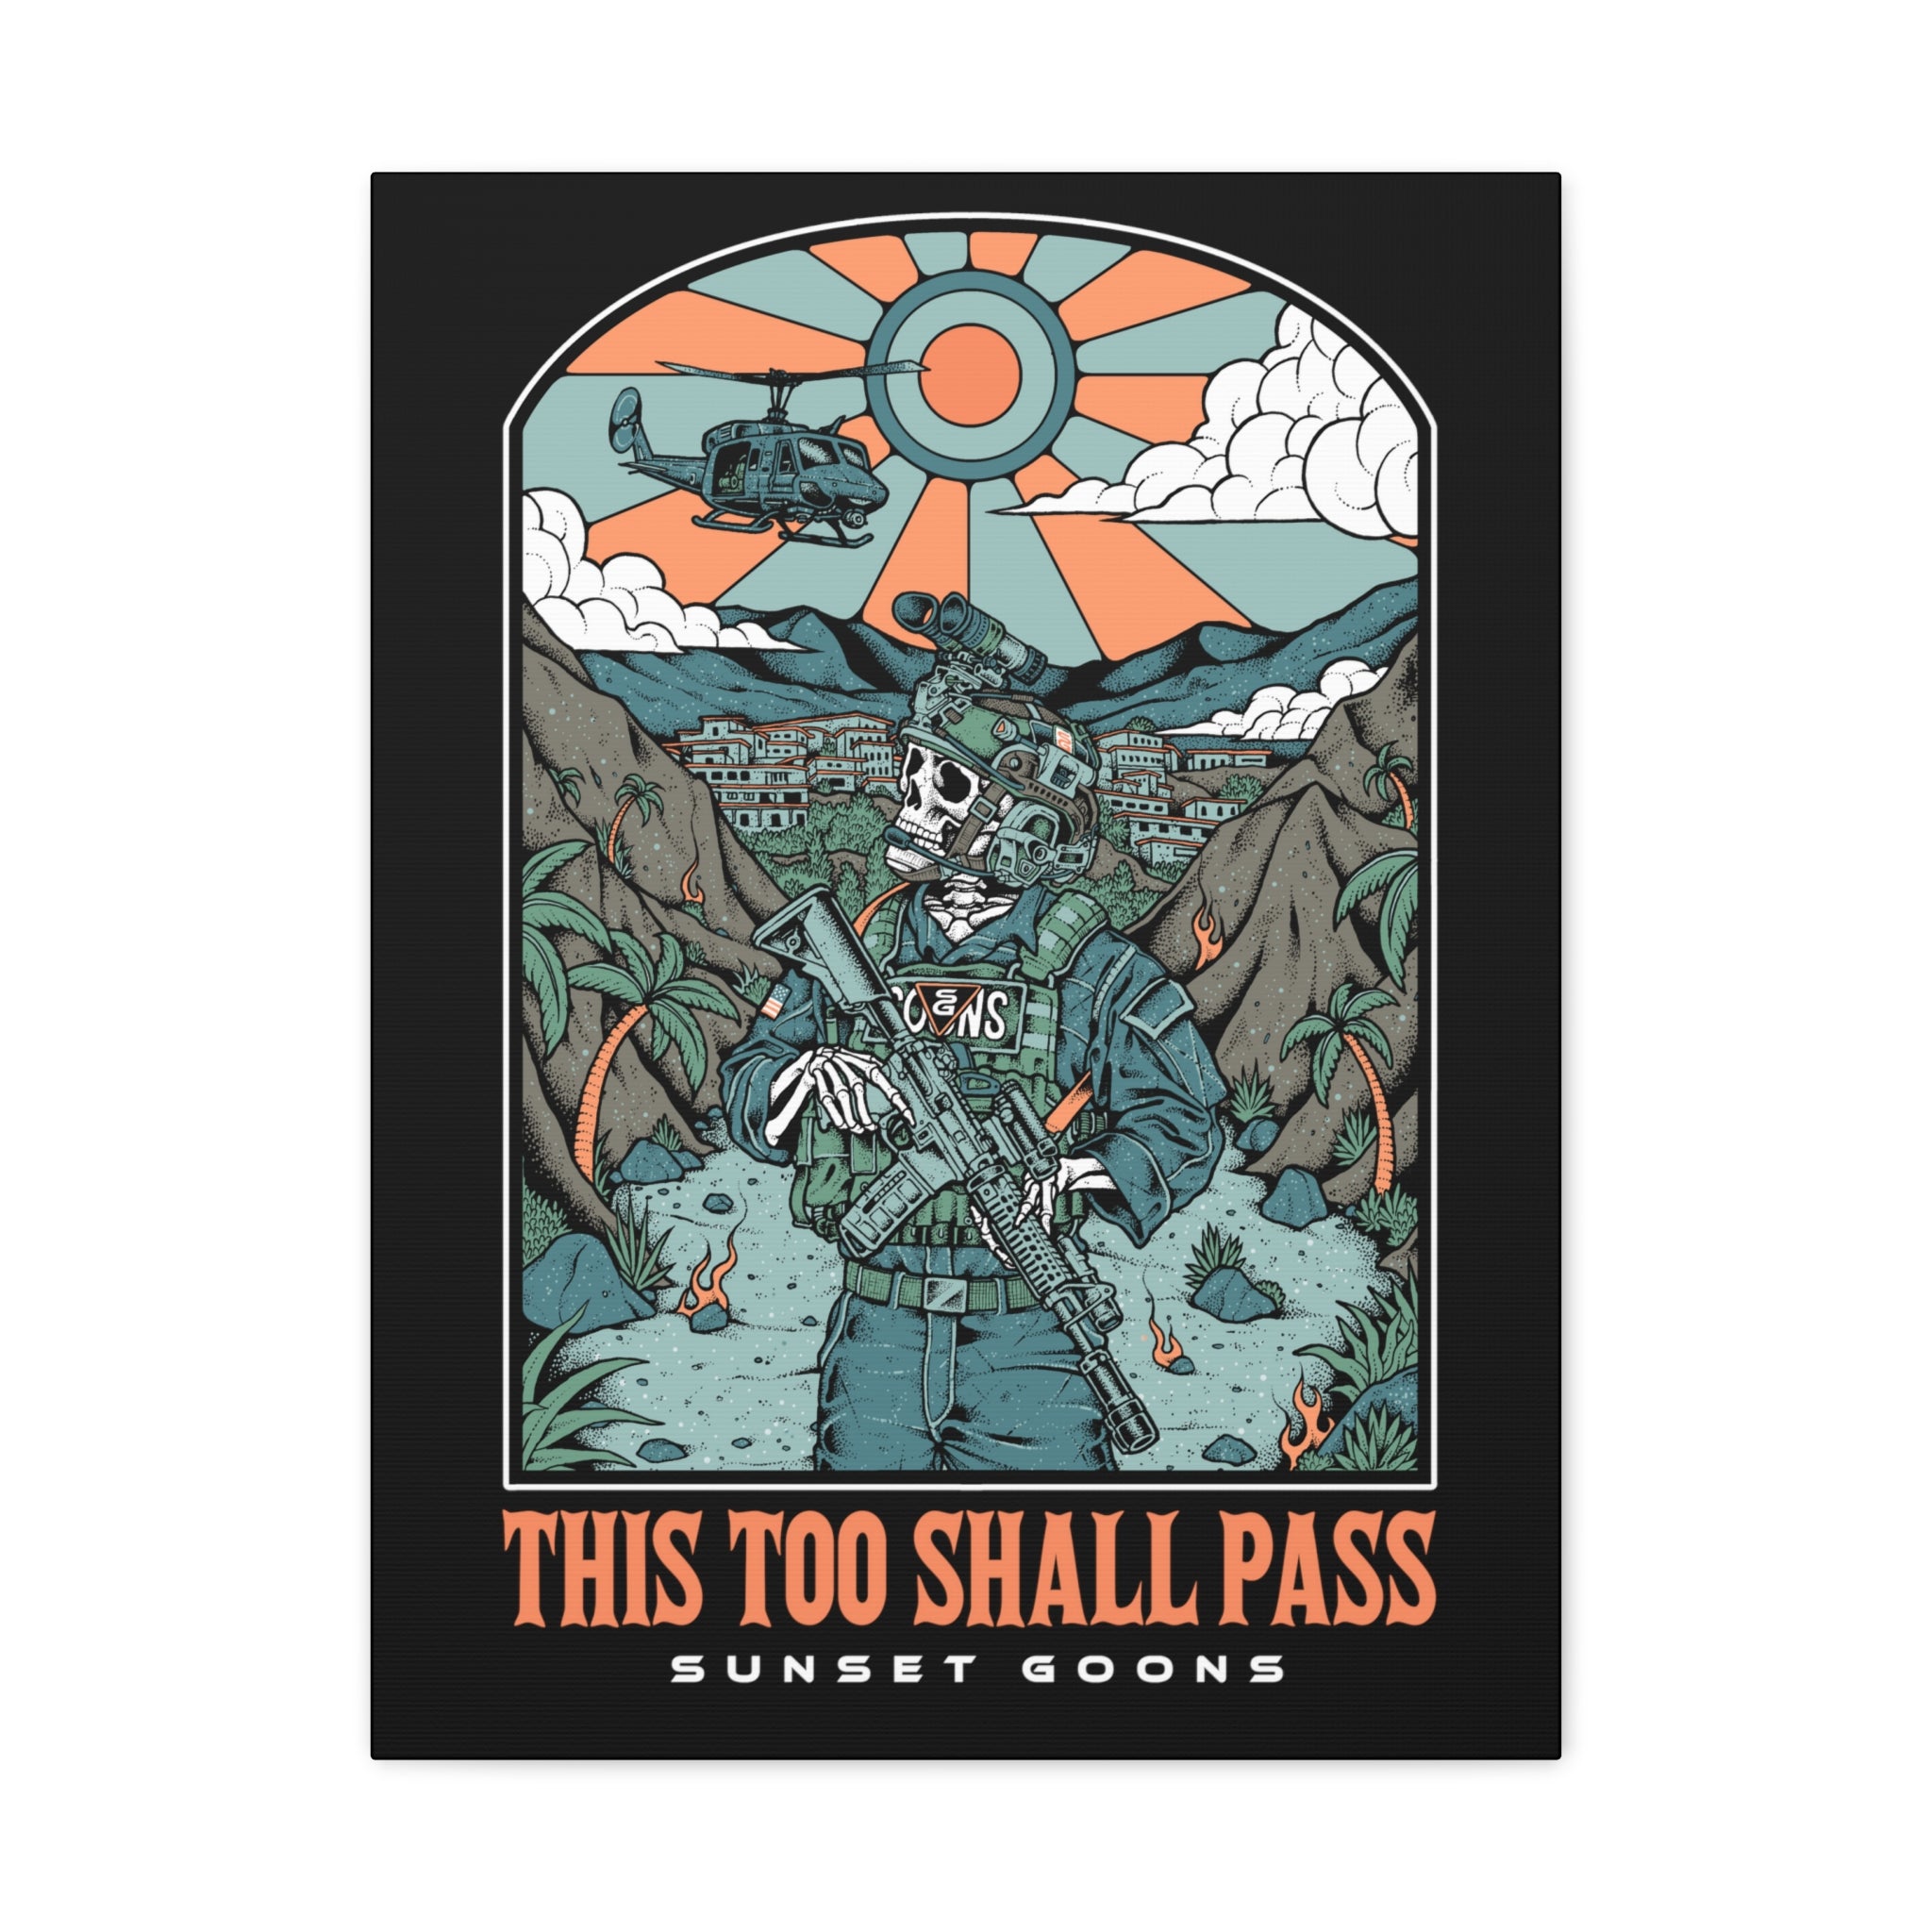 Newest Drop – Page 3 – Sunset Goons